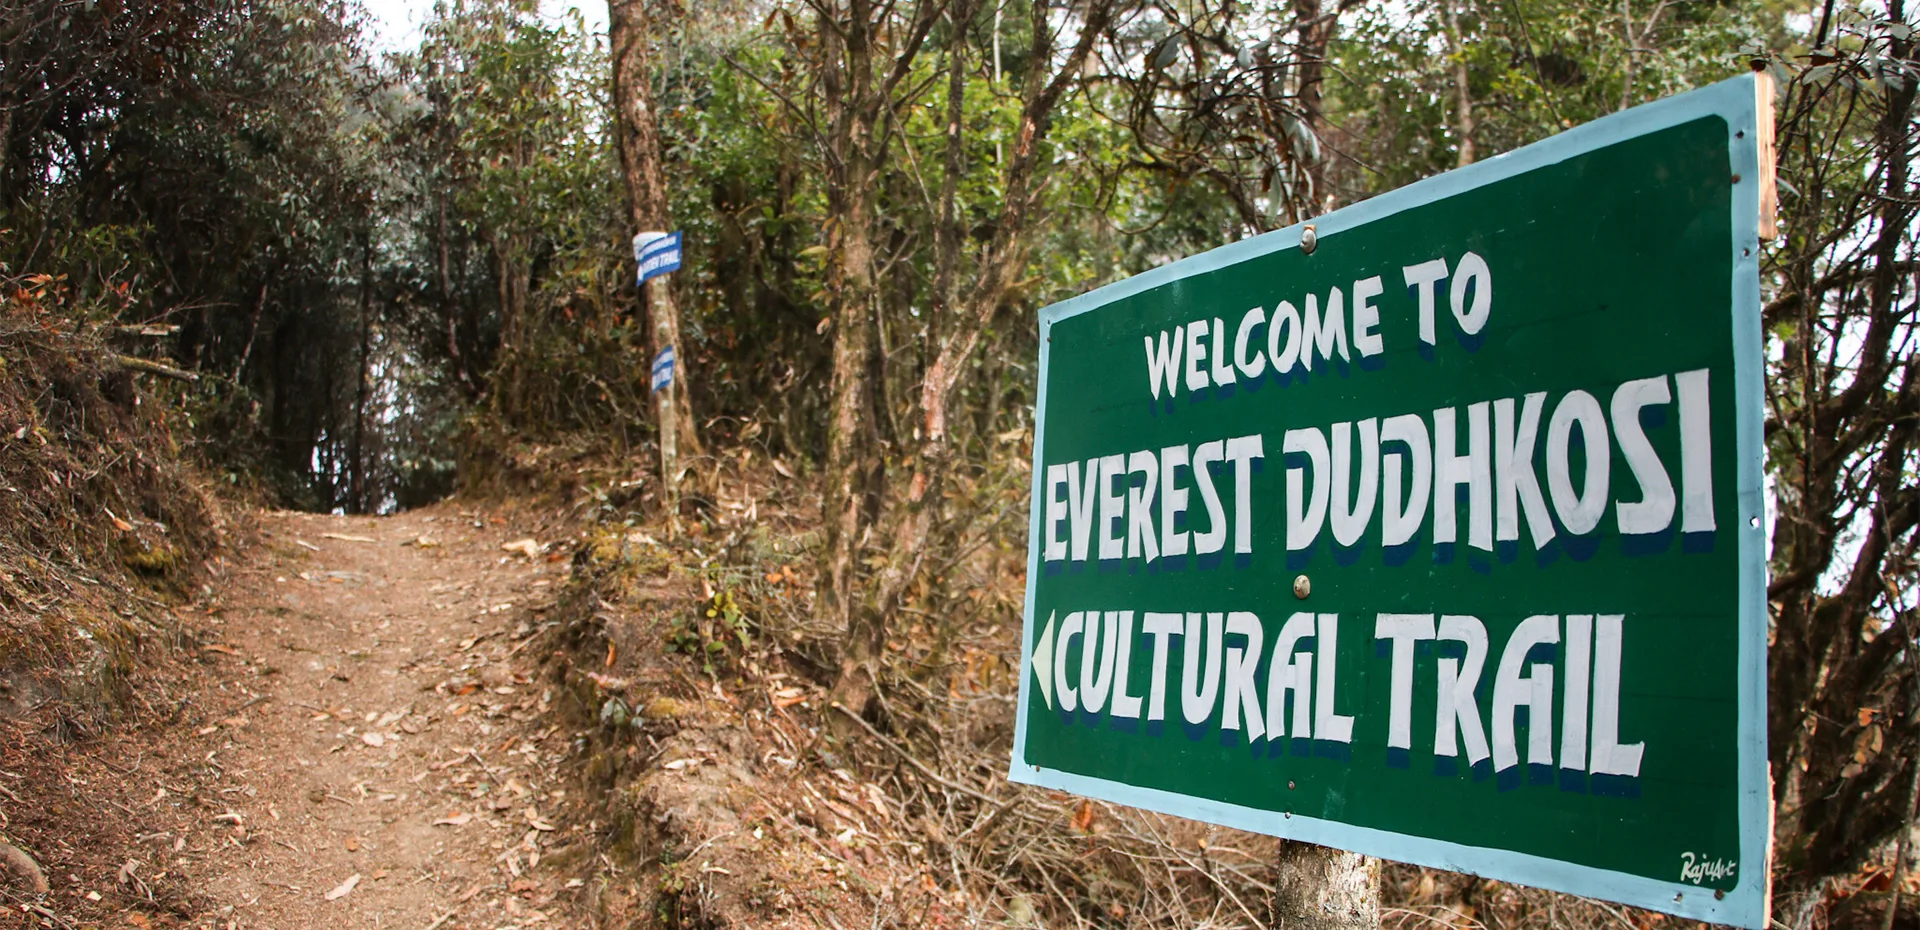 Background Image of Everest Dudh Koshi cultural trail opens in Solukhumbu